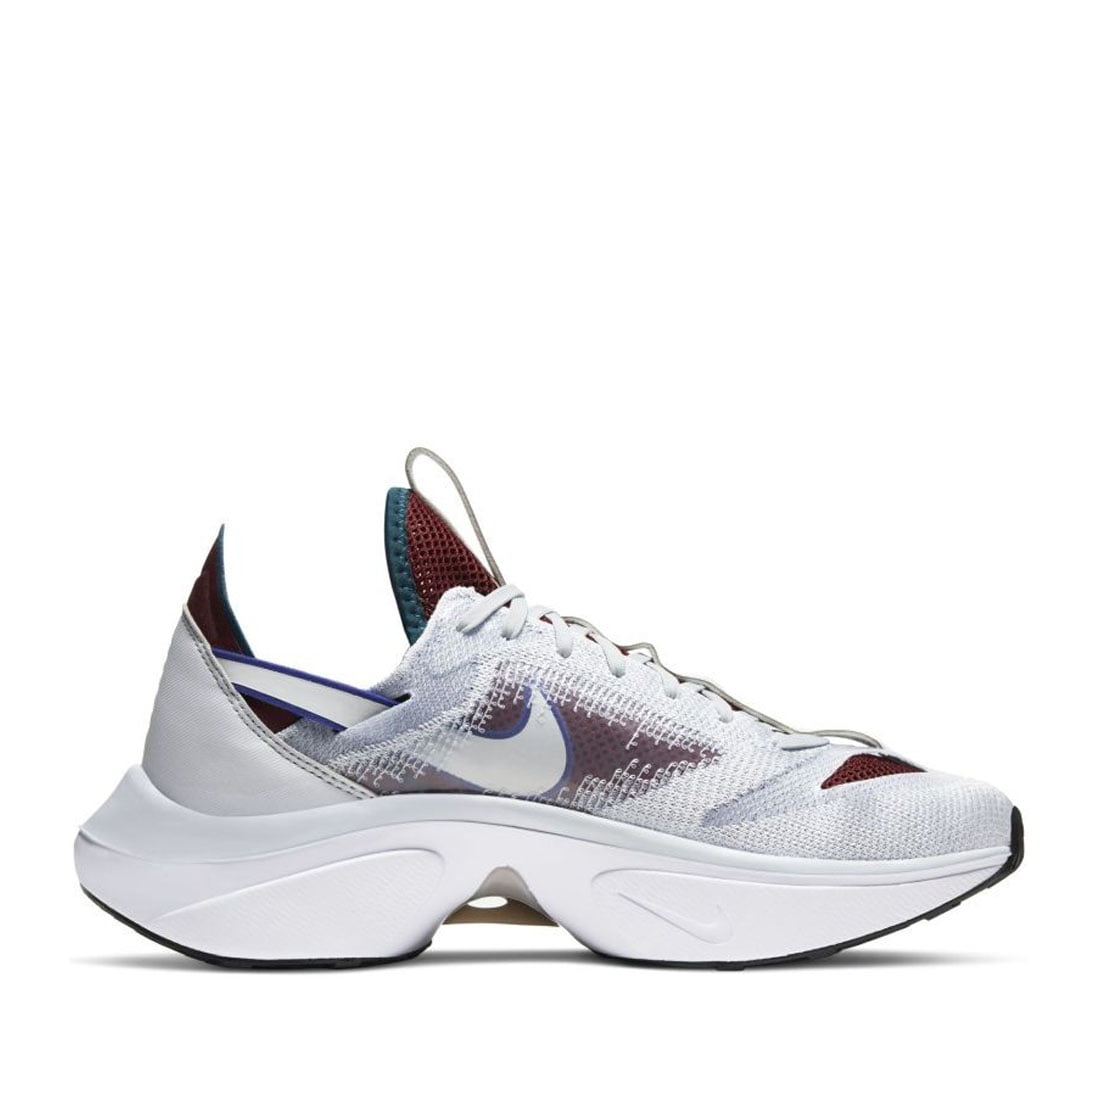 Buy Low-Top Slip-On Running Shoes Online at Best Prices in India - JioMart.